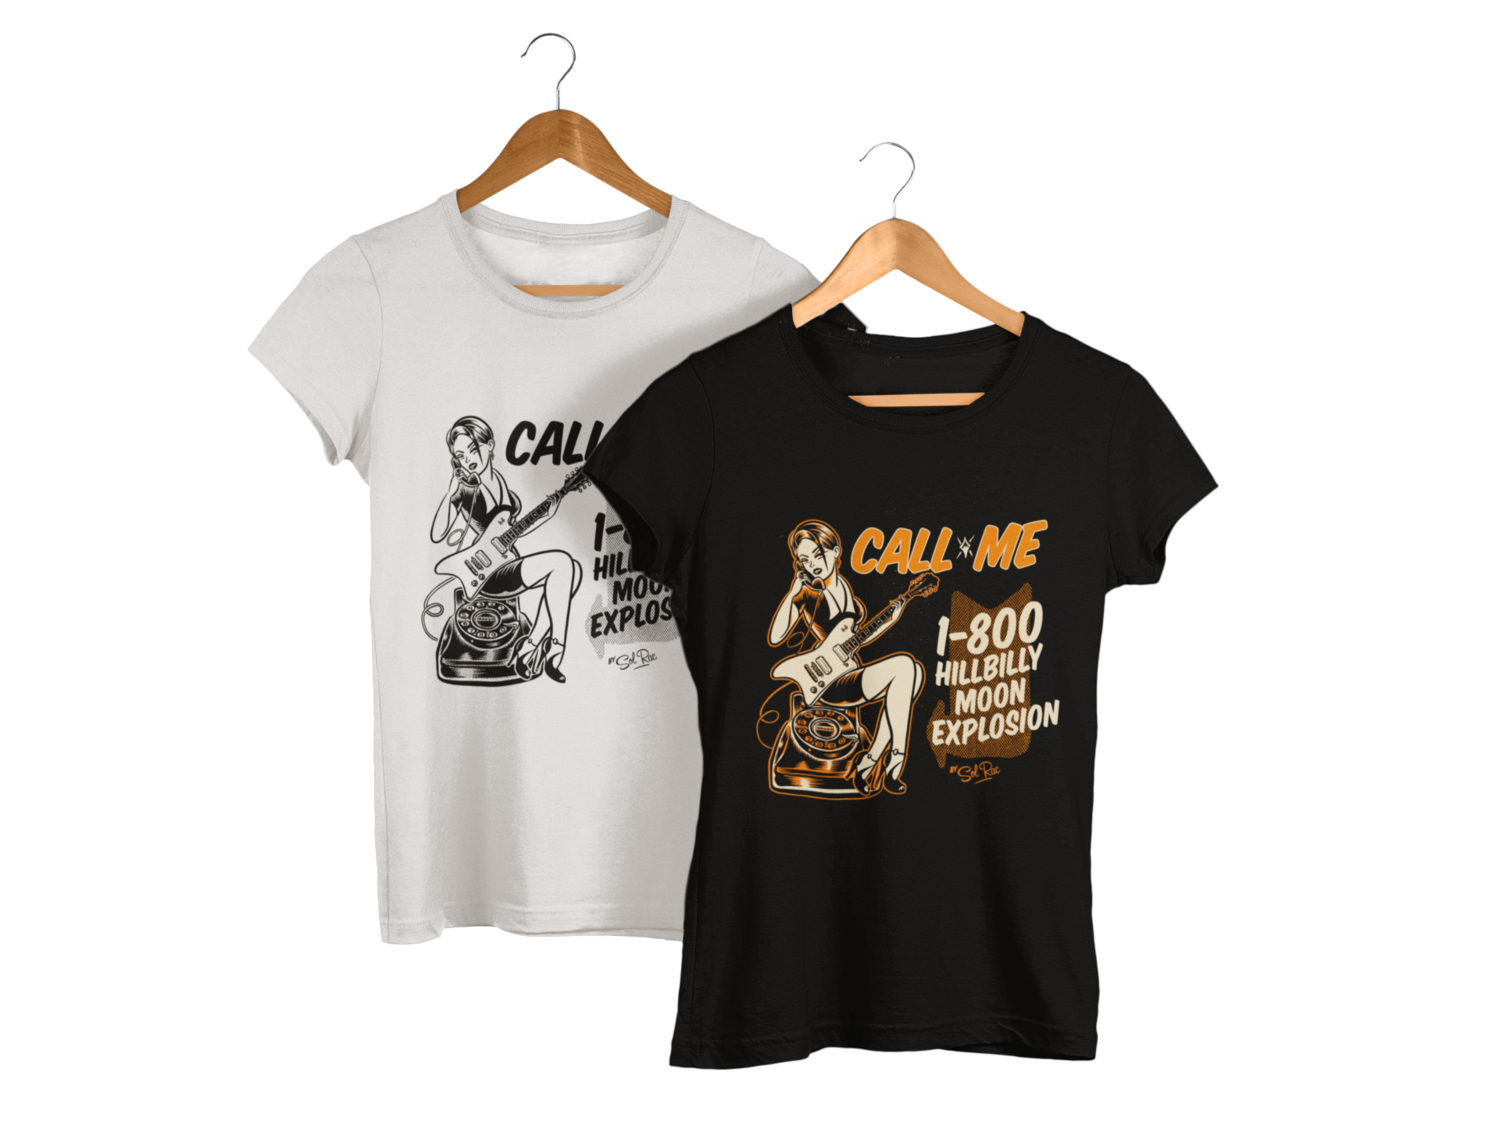 HILLBILLY MOON EXPLOSION "Call Me" tshirt for WOMEN by Solrac